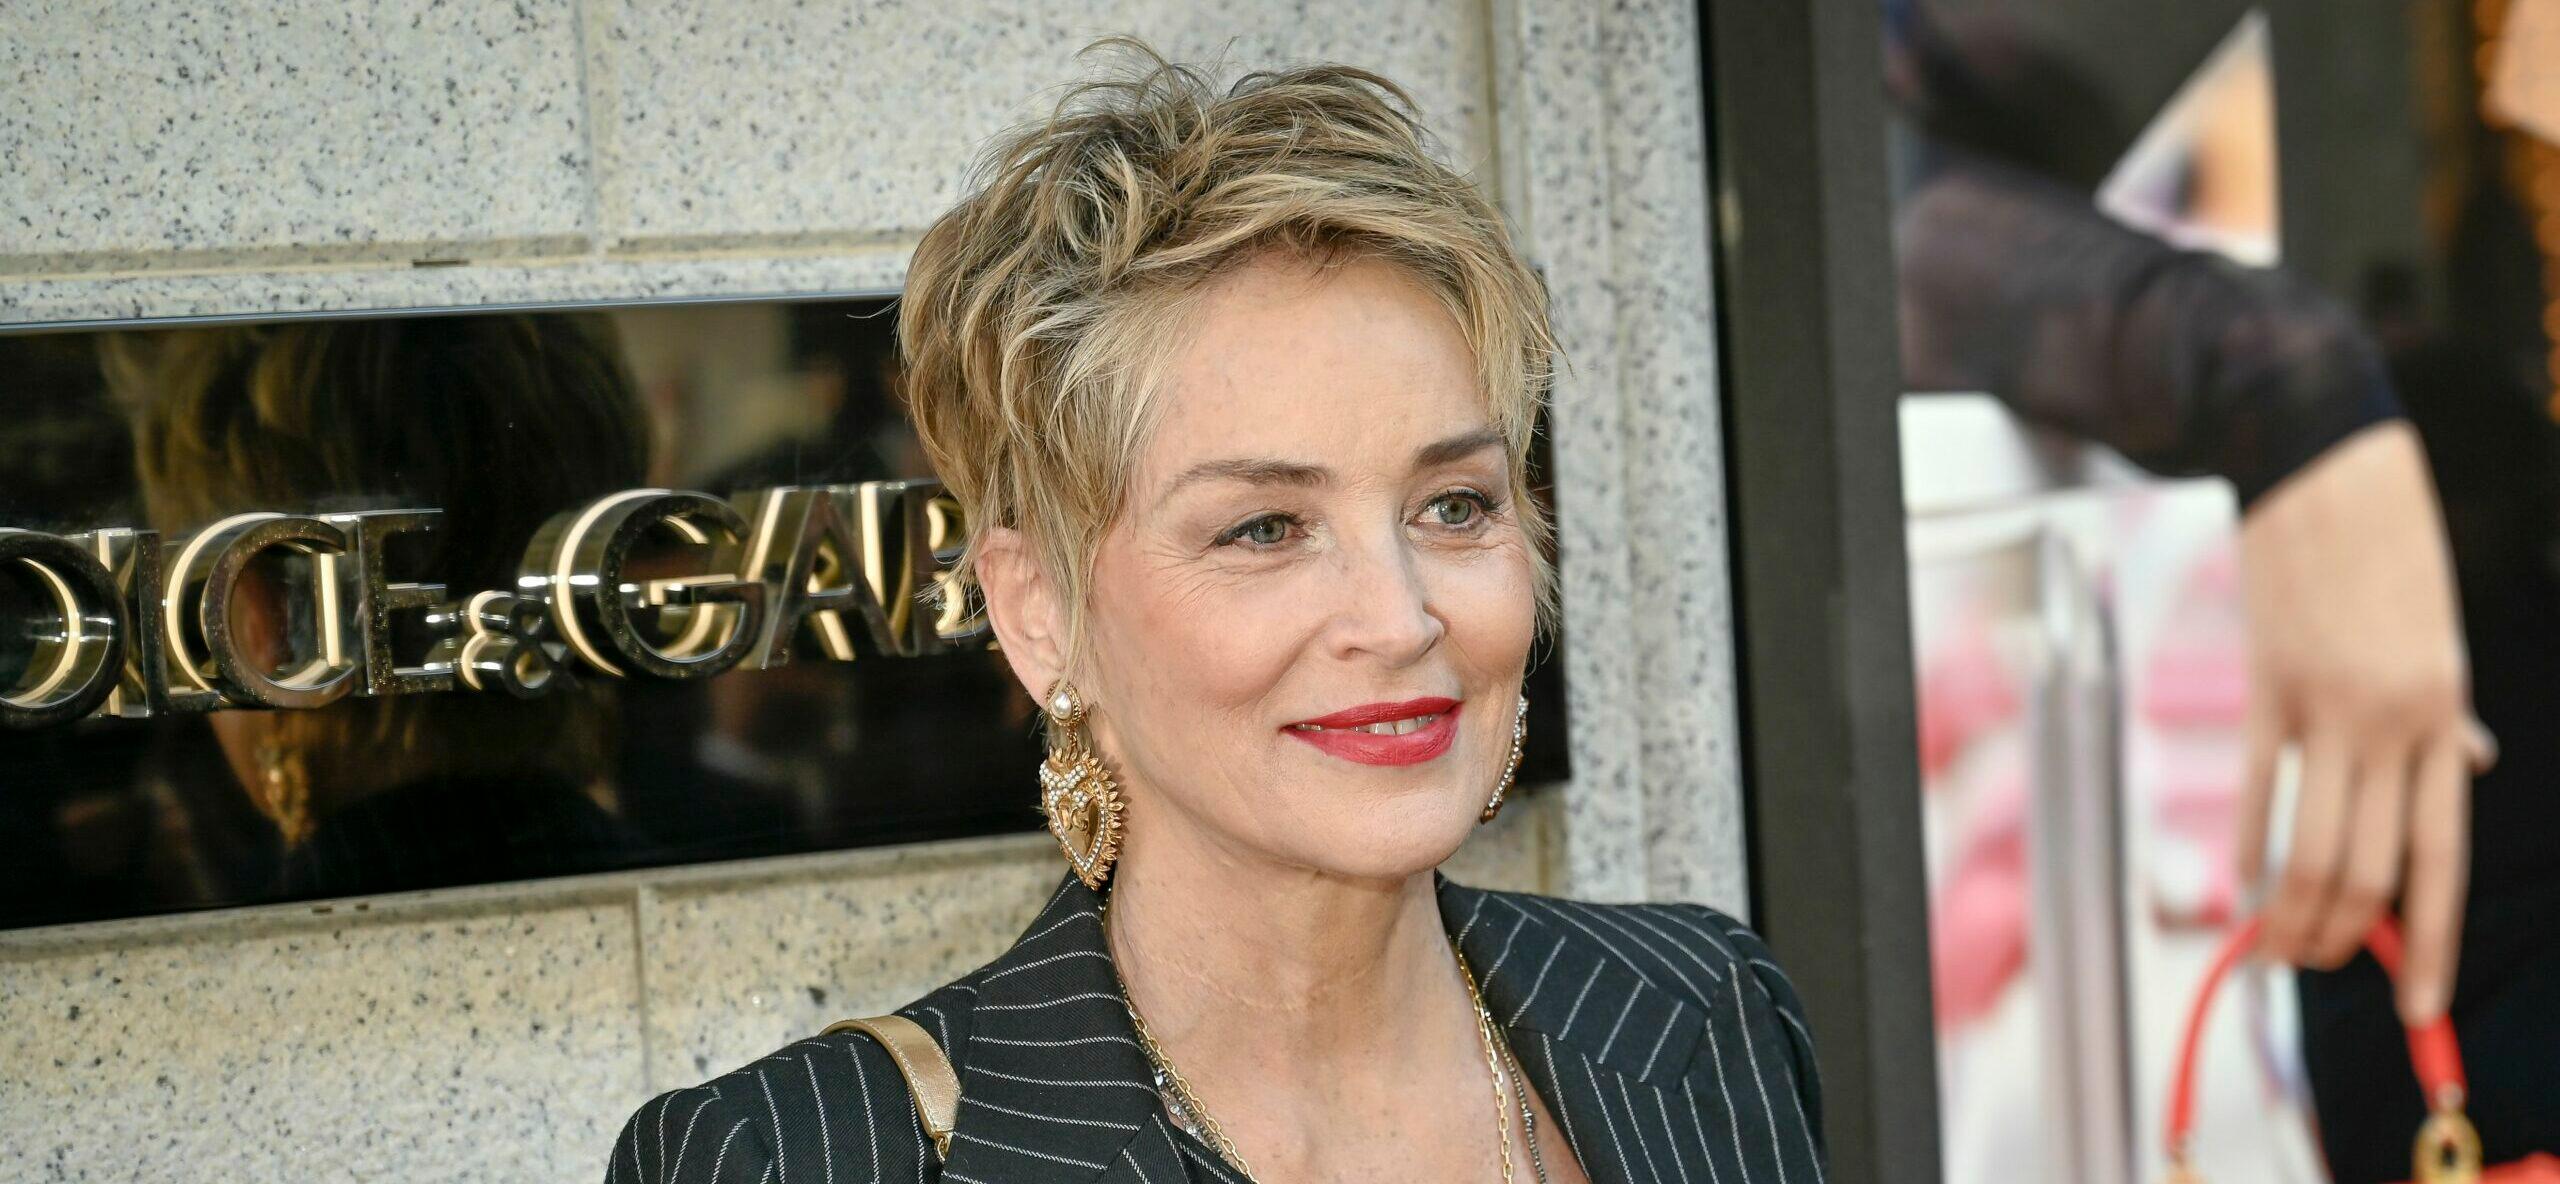 Sharon Stone arrives at the Dolce